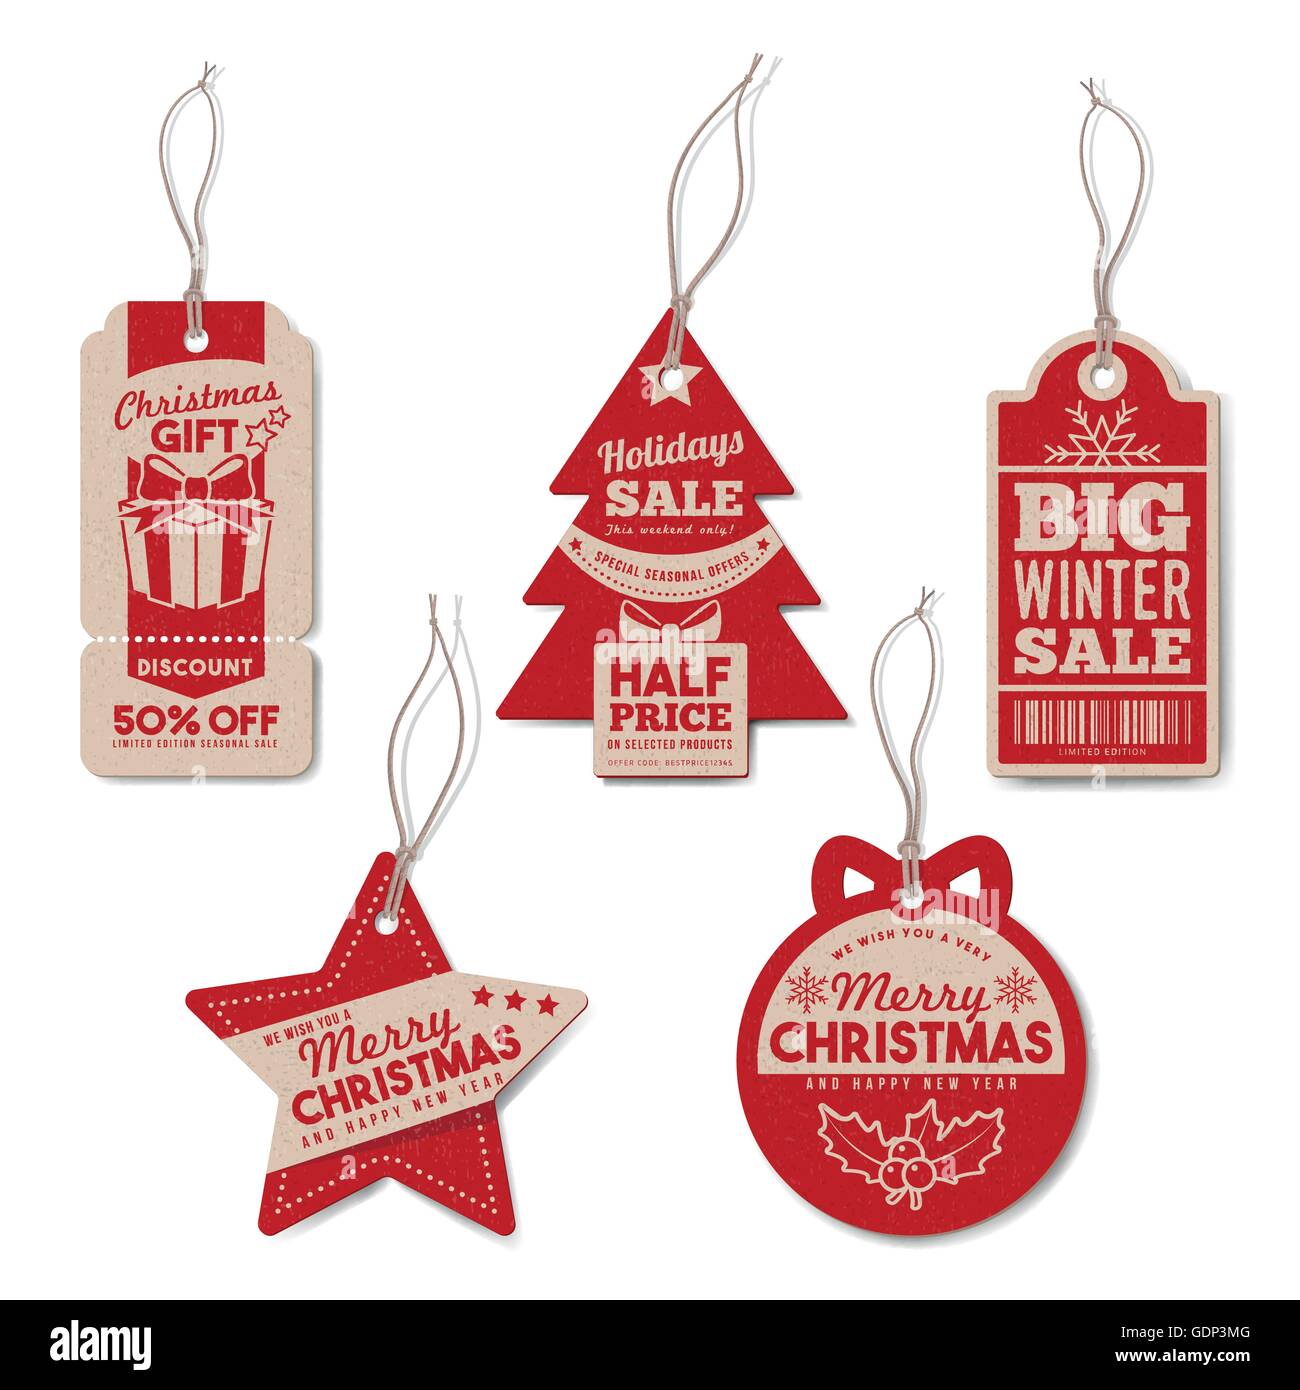 Vintage Christmas and winter tags set with string, textured realistic paper, retail, sale and discount concept Stock Vector